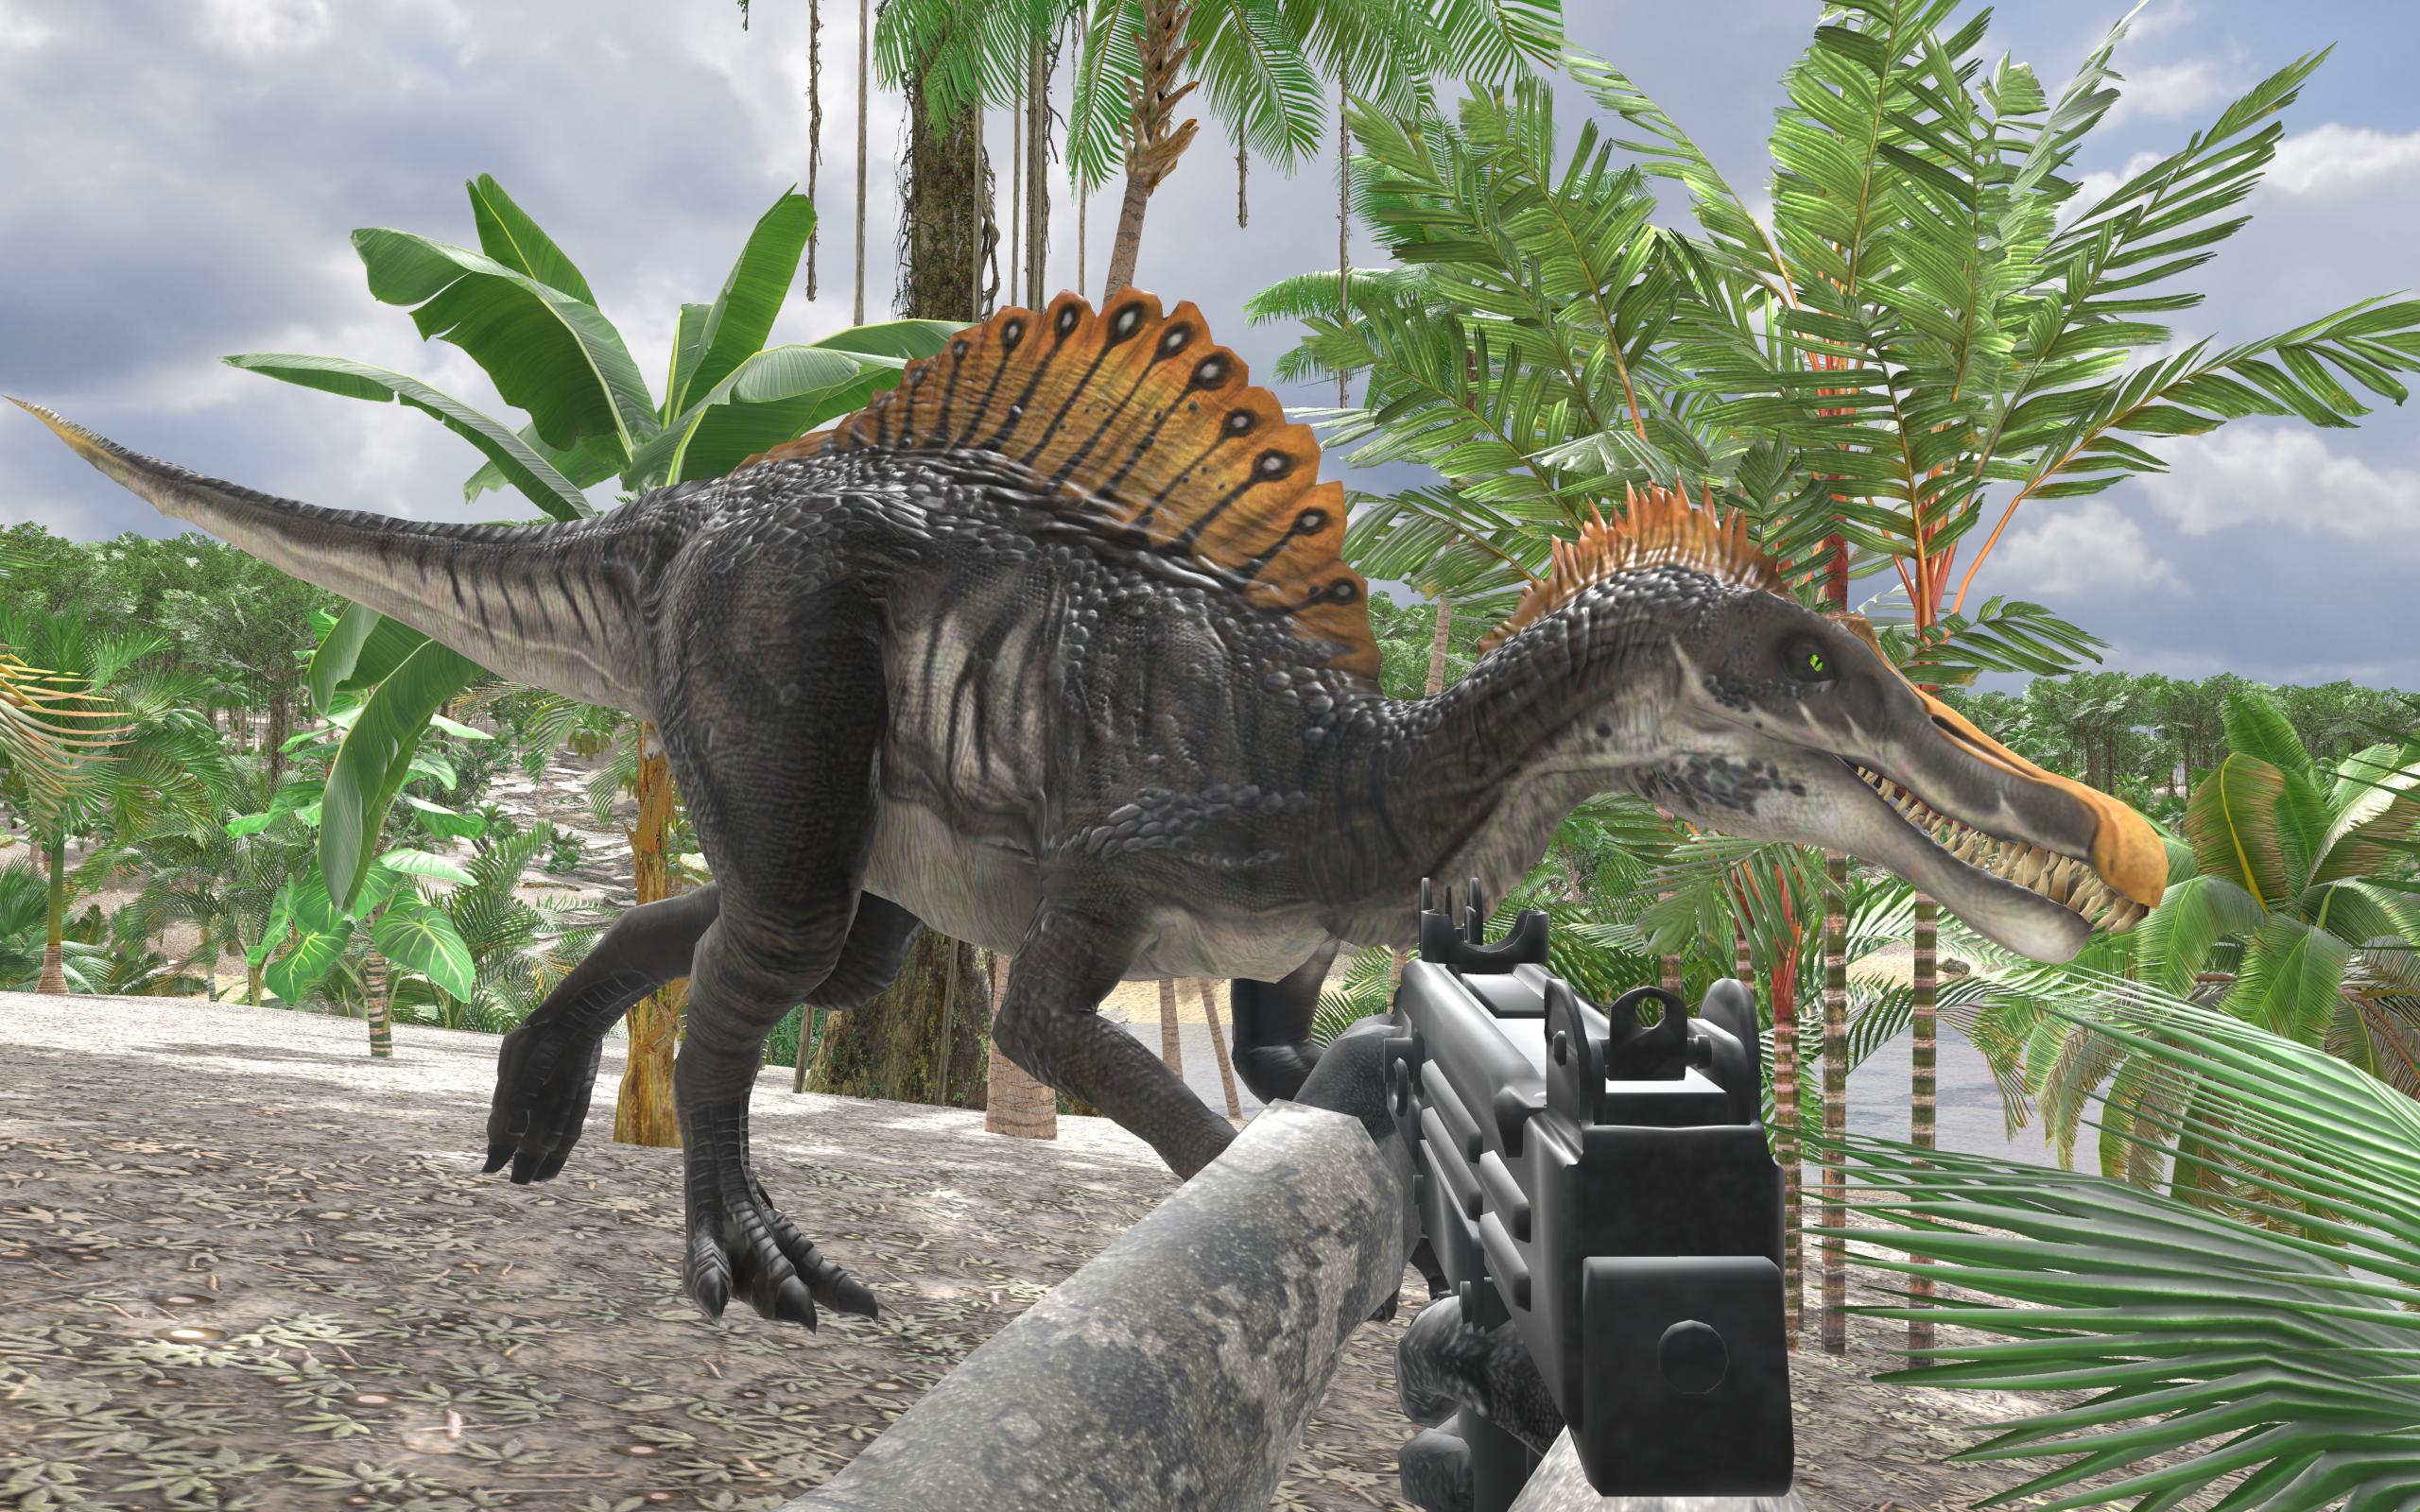  DINOSAUR  HUNTER SURVIVAL GAME  for Android APK Download 